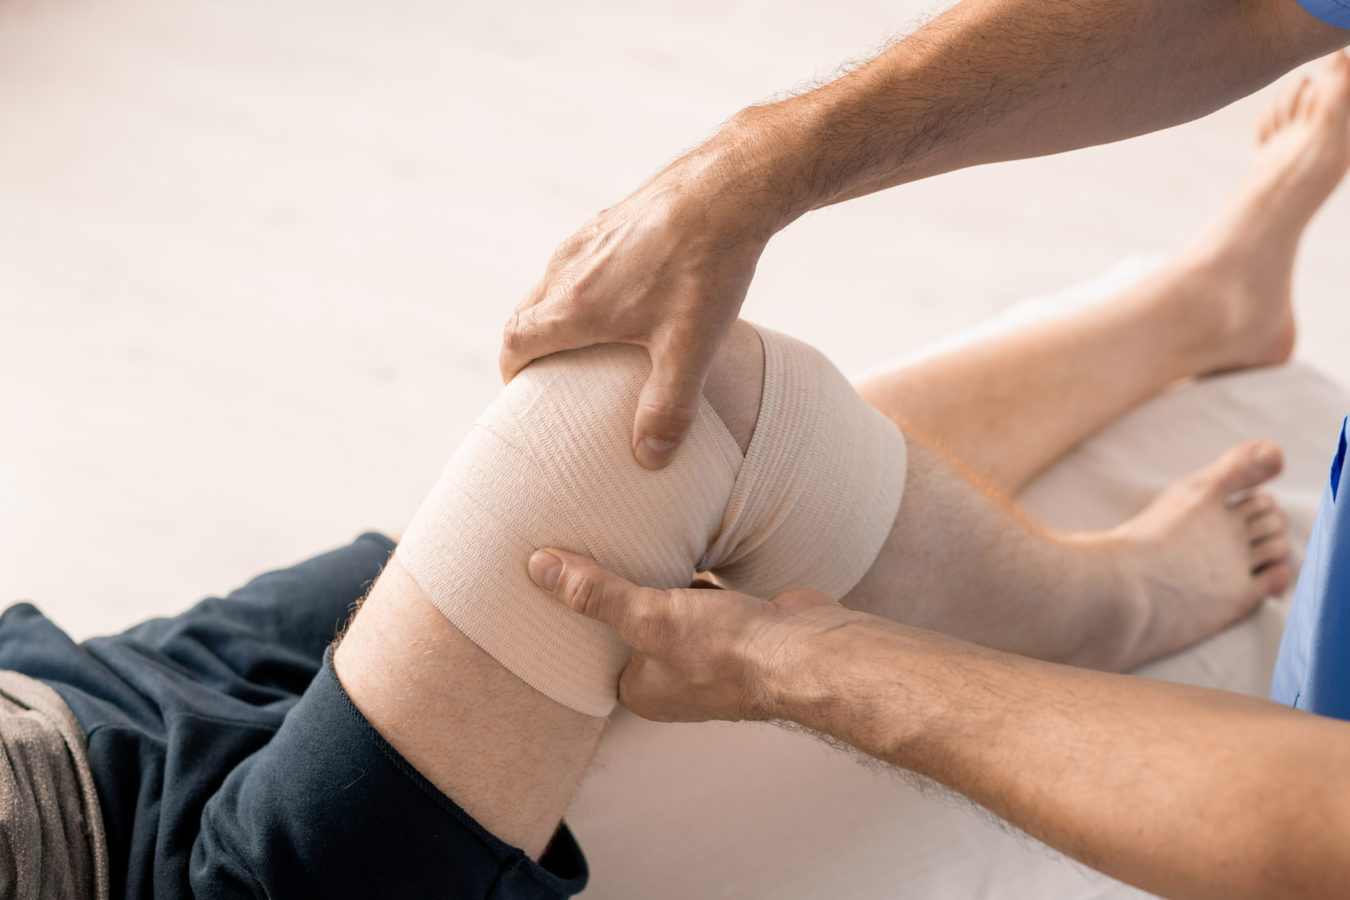 Hands of male clinician wrapping knee of disable patient with flexible bandage